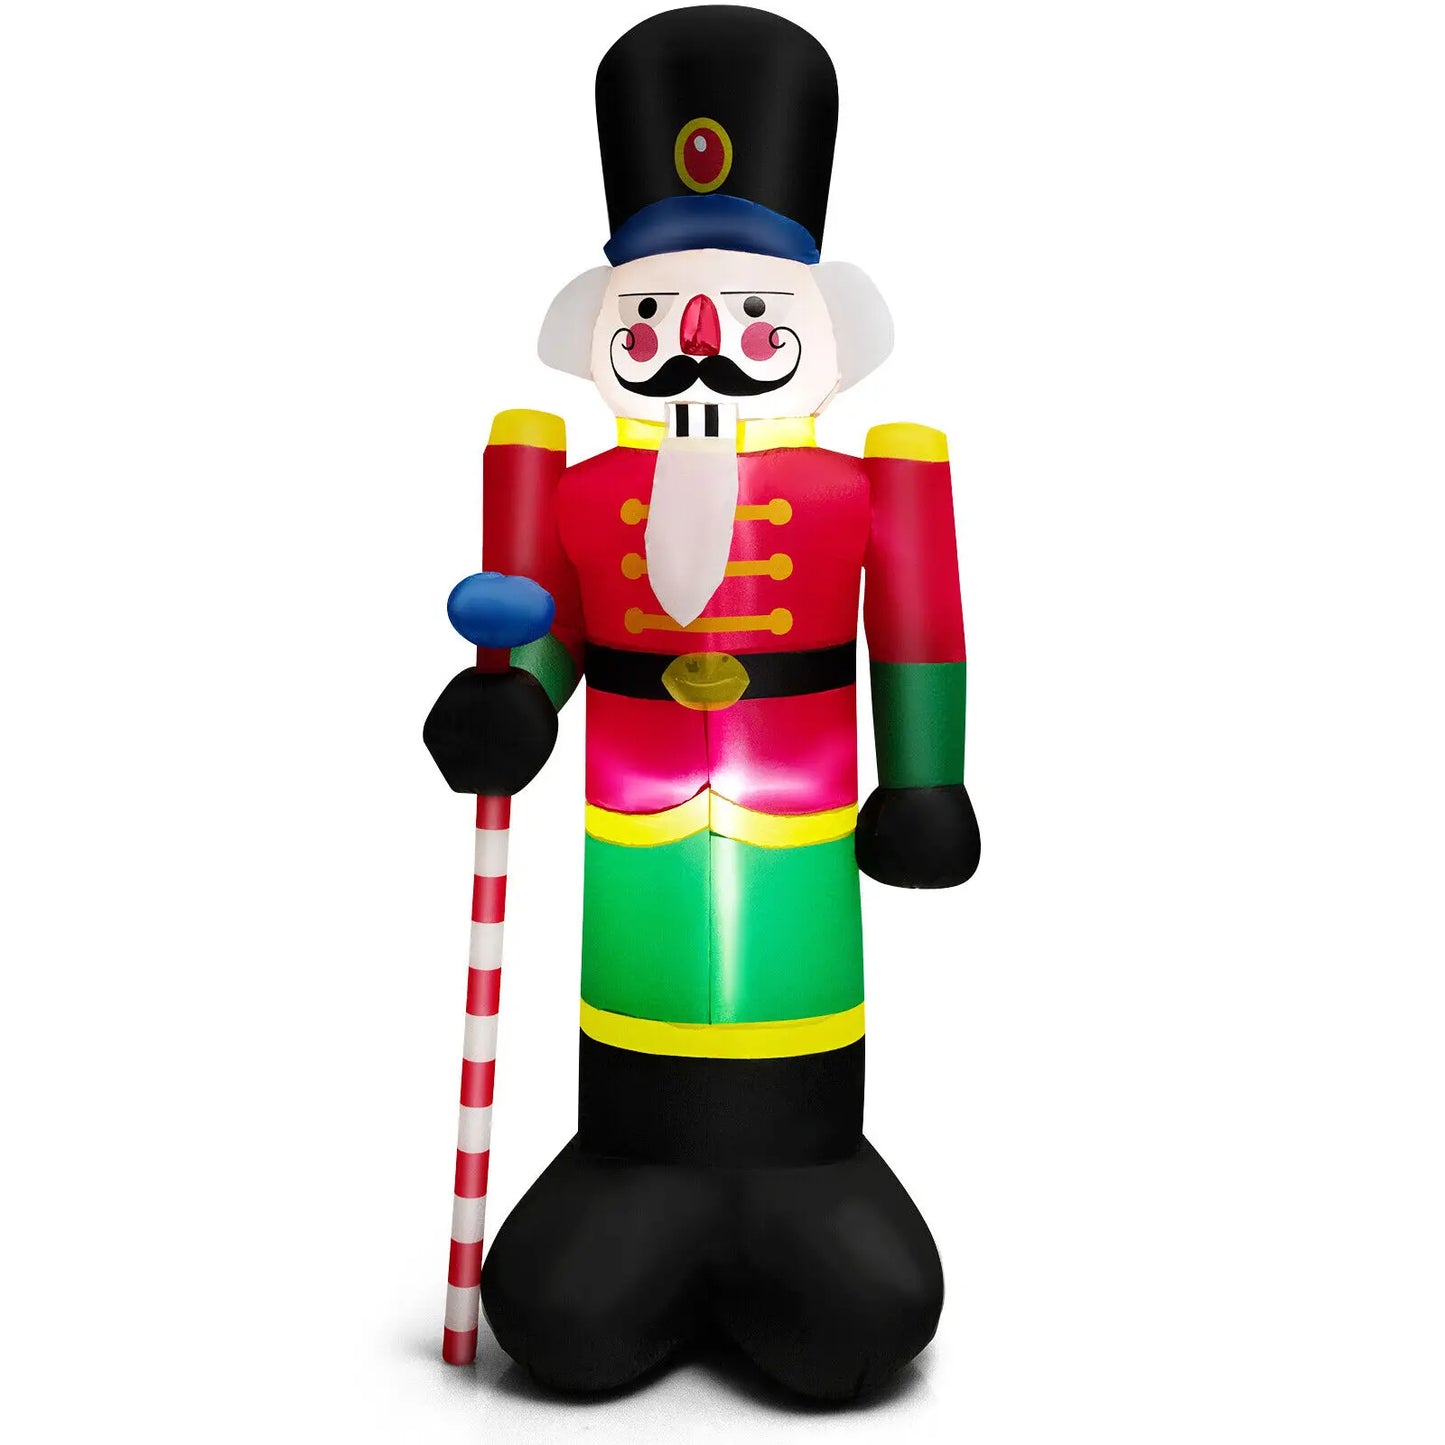 Costway 8FT Inflatable Nutcracker Soldier Blow-up Christmas